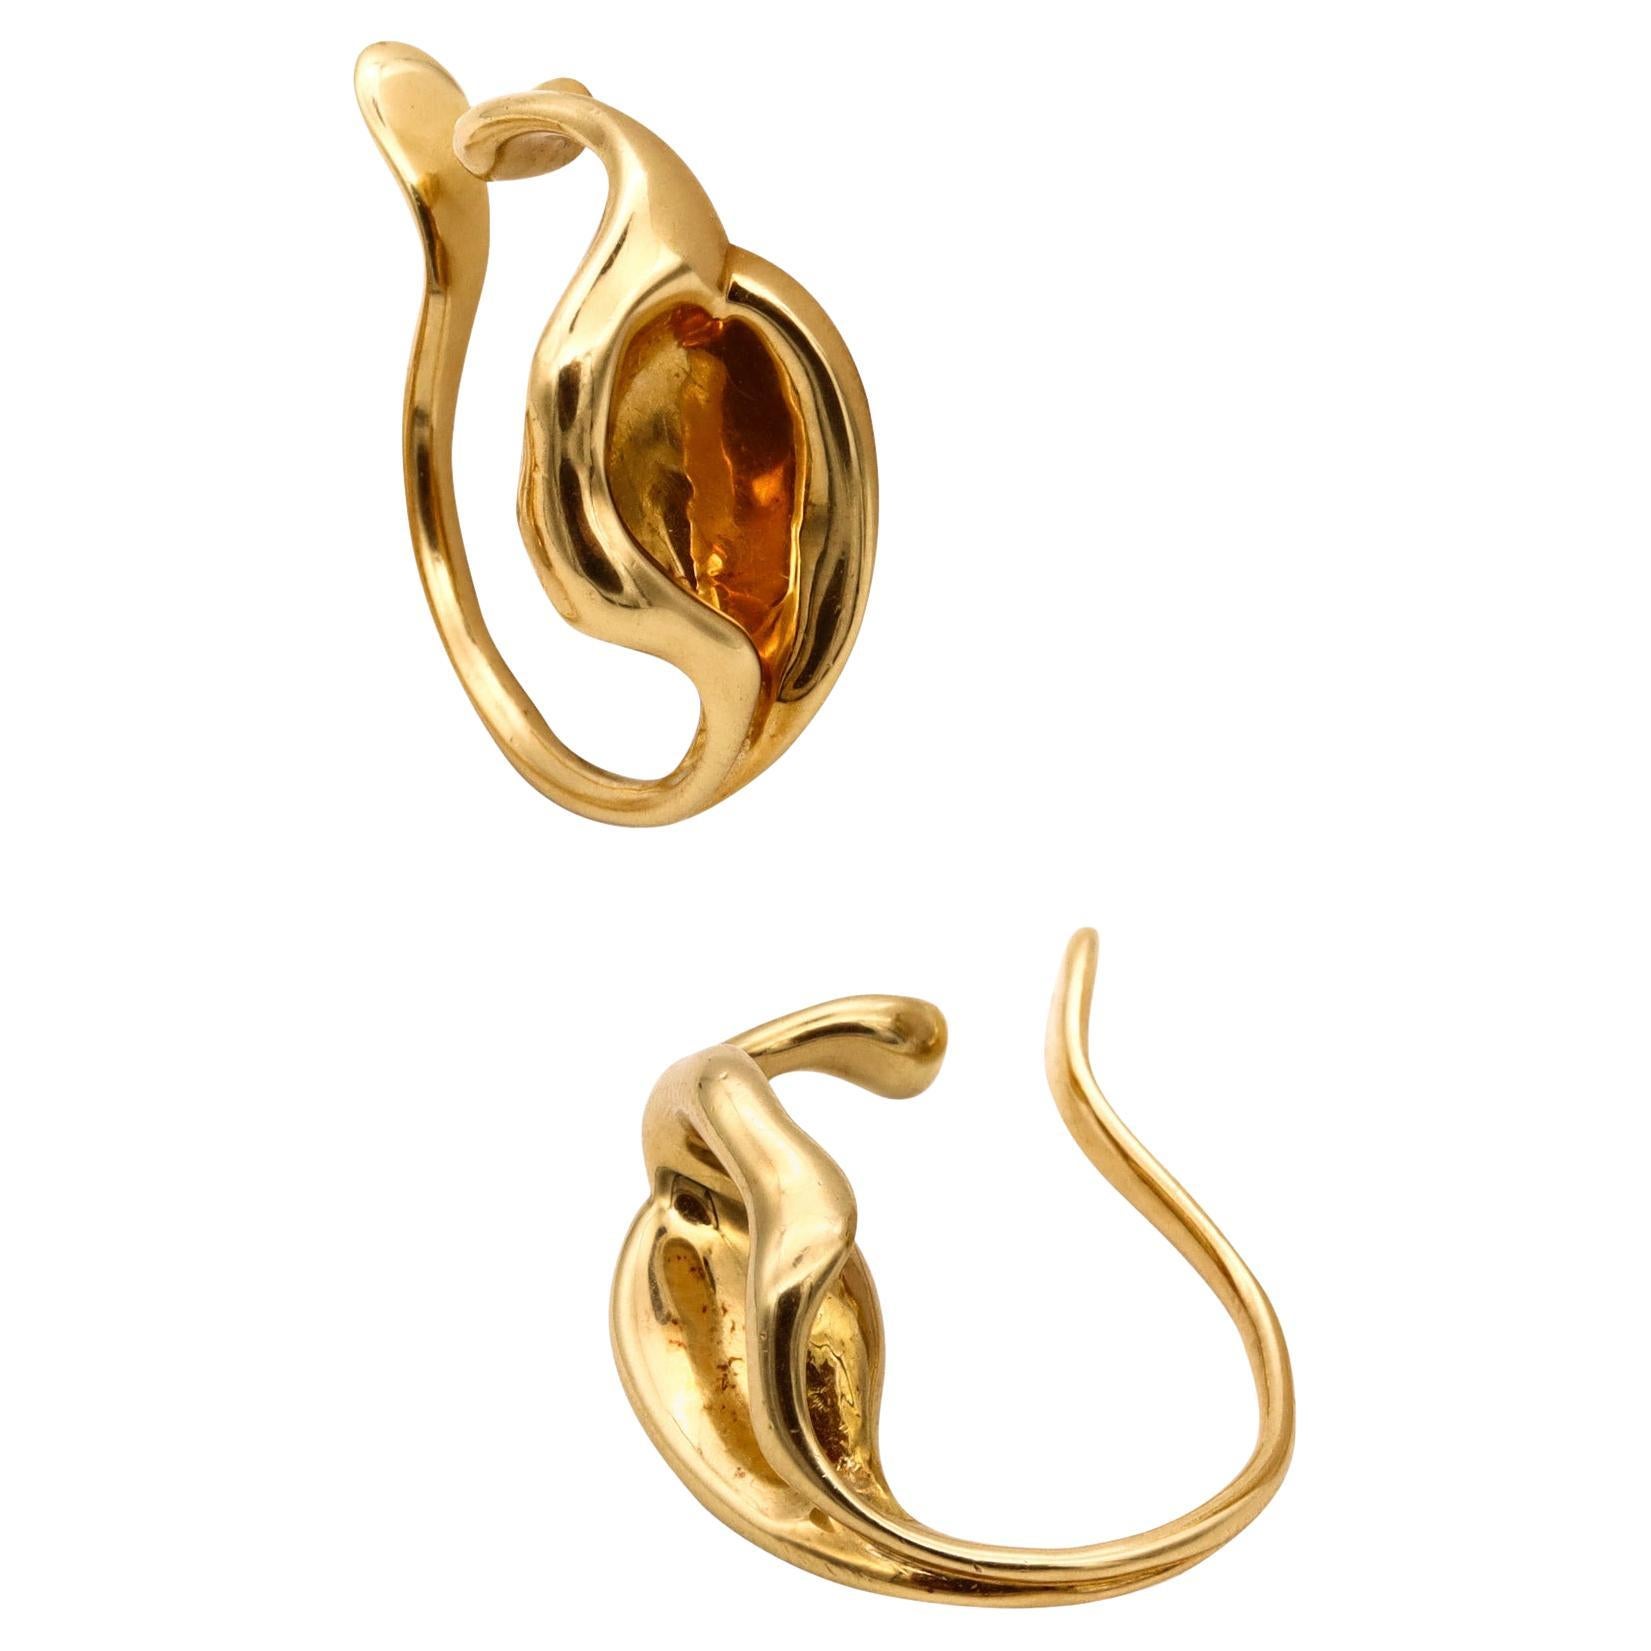 Tiffany Co. by Elsa Peretti Rare Vintage Organic Lilies Earrings Solid 18Kt Gold For Sale